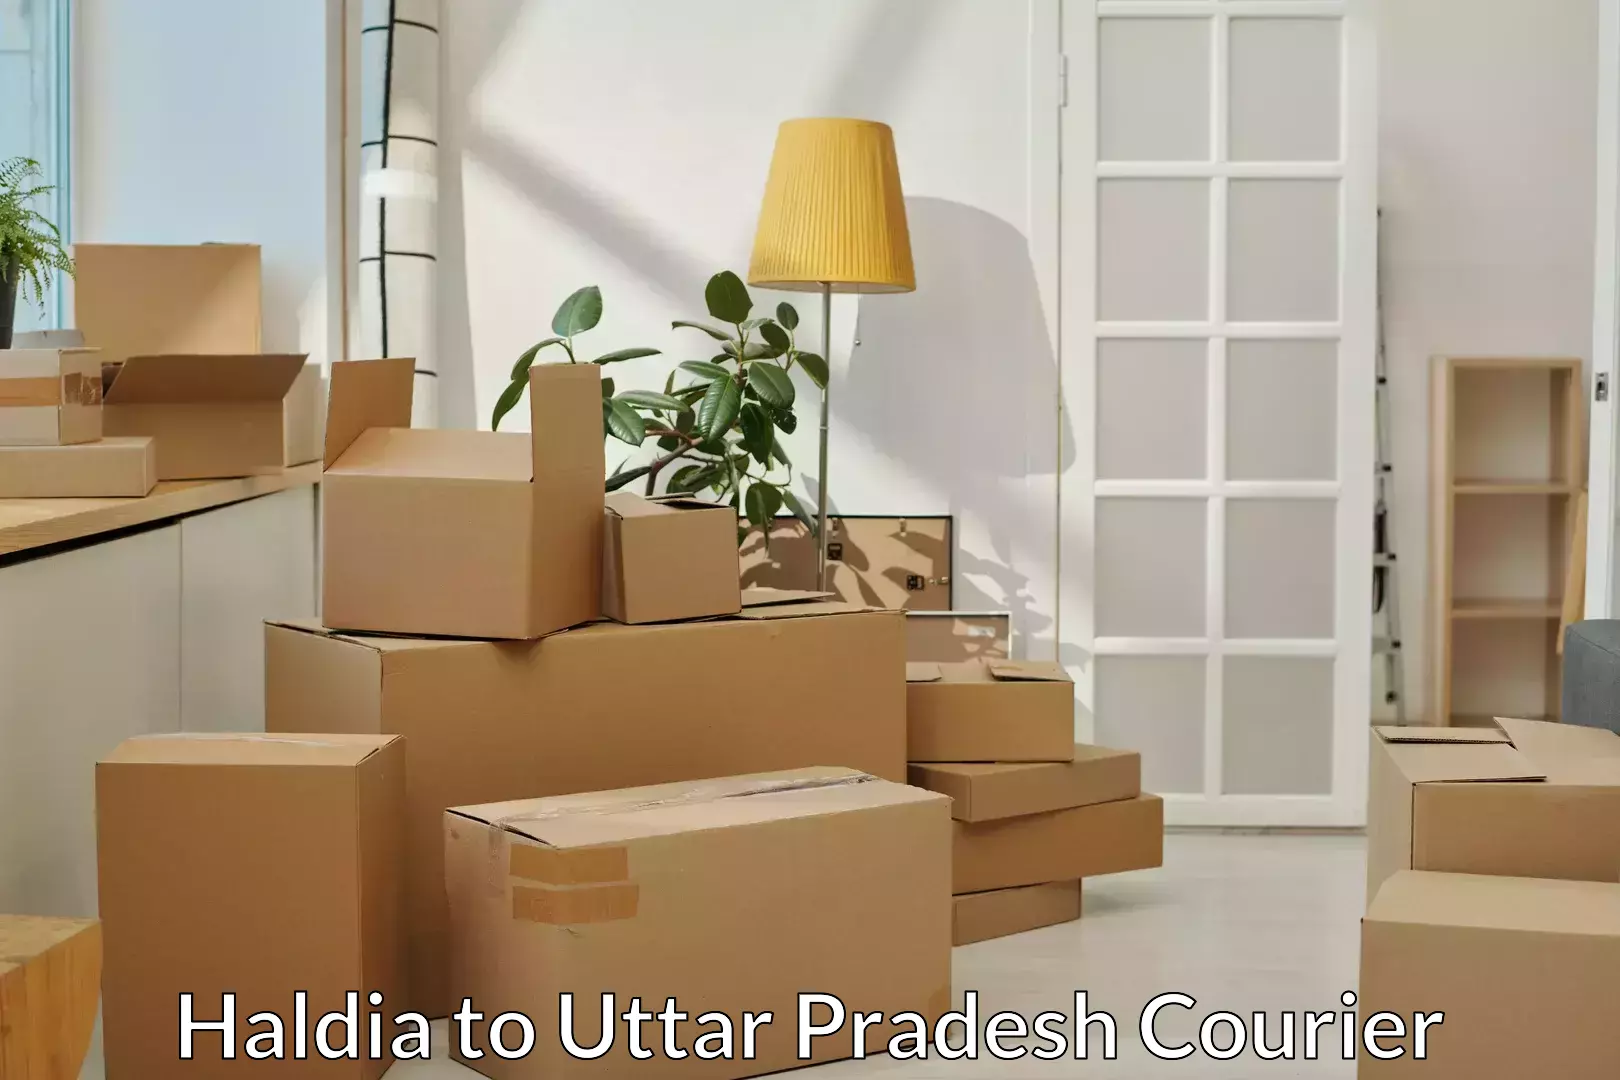 Furniture delivery service in Haldia to Bhadohi